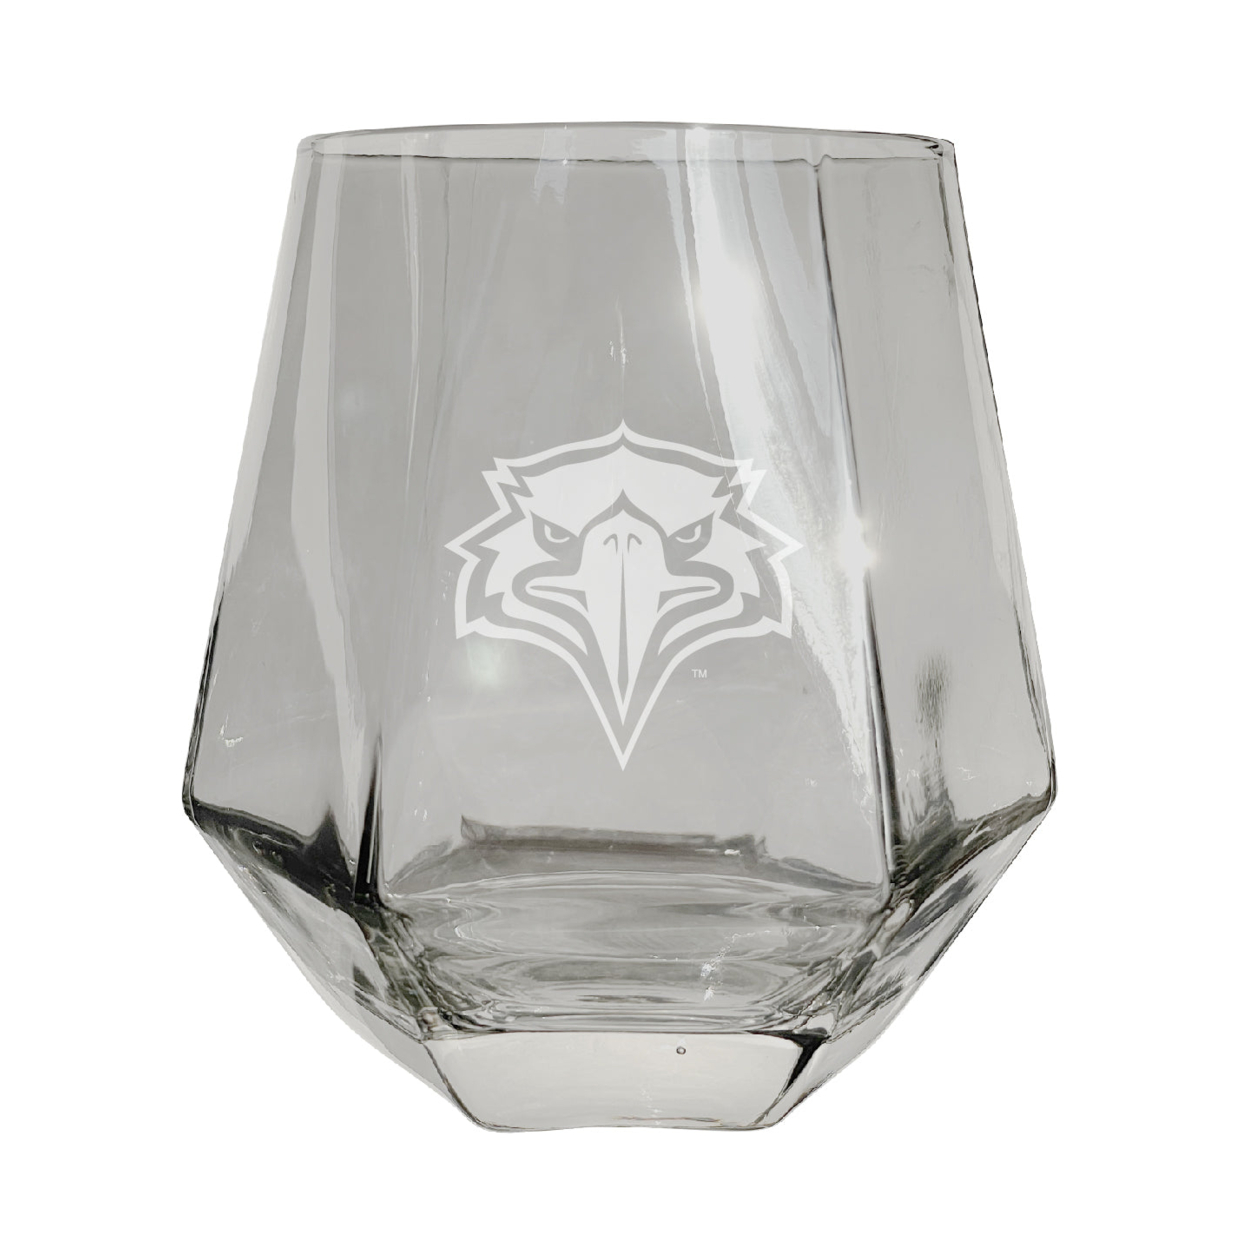 Morehead State University Etched Diamond Cut Stemless 10 Ounce Wine Glass Clear